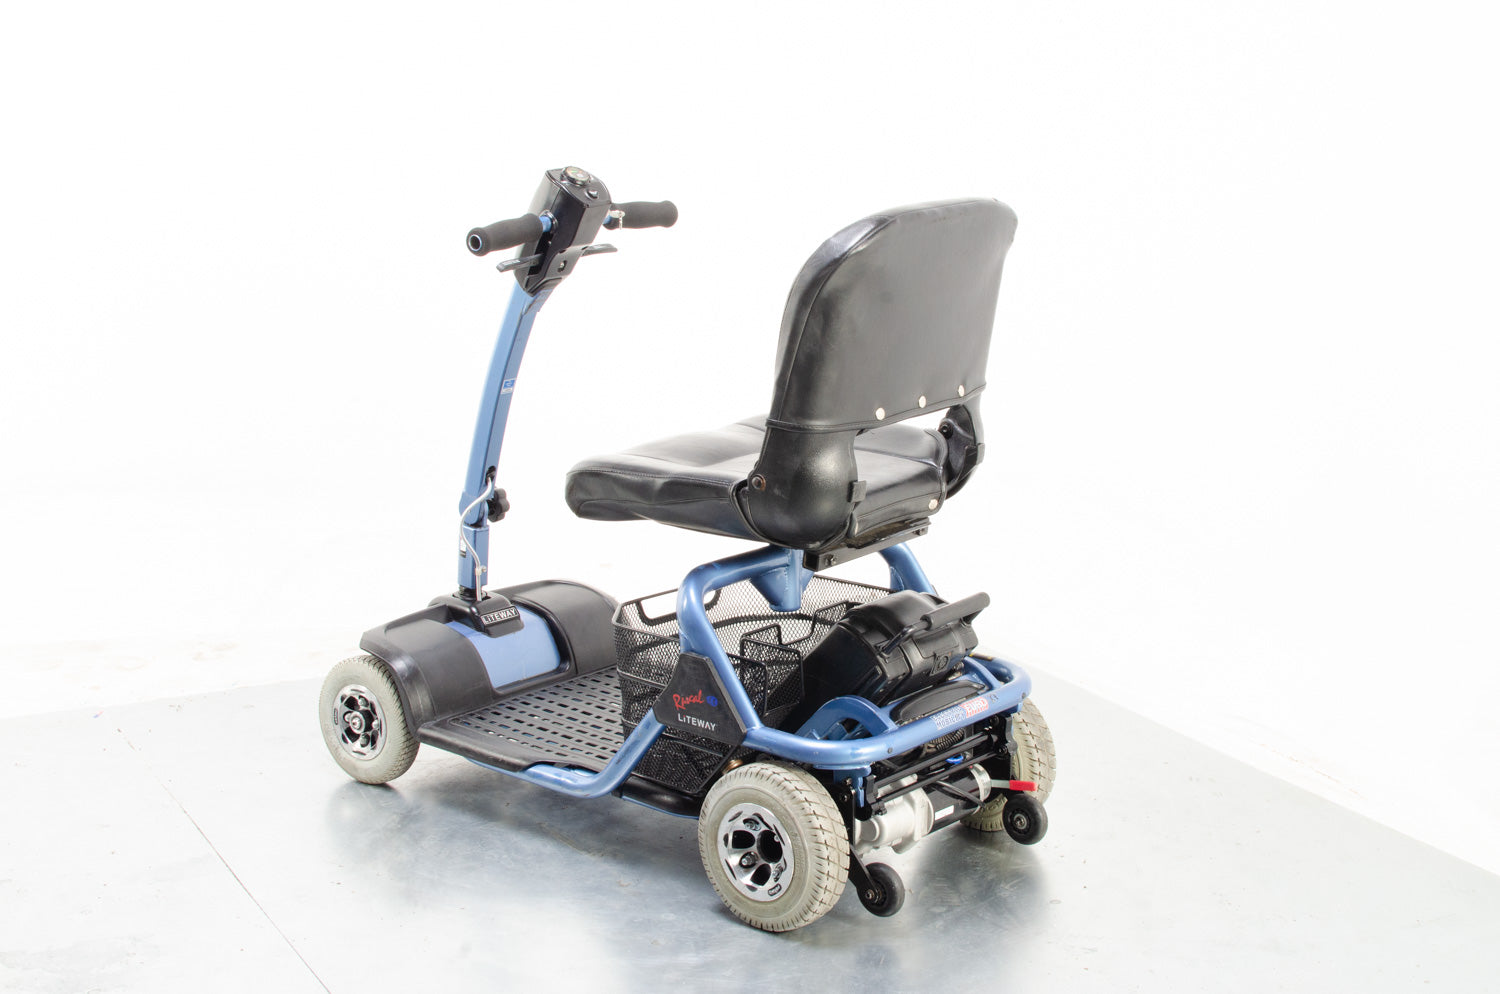 2008 Rascal Liteway 4 4mph Transportable Boot Electric Mobility Scooter in Blue